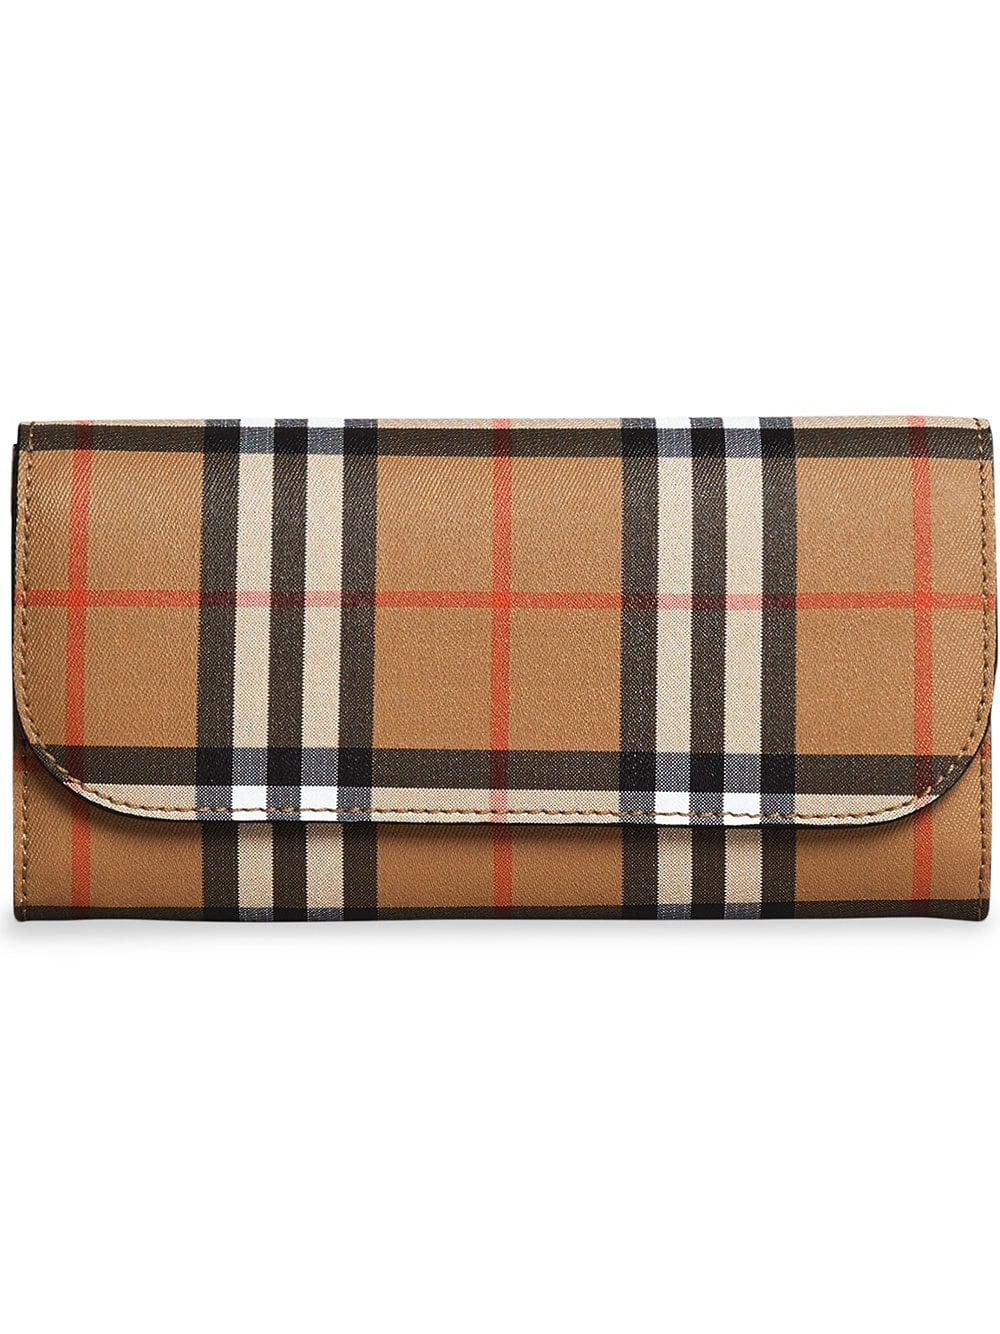 Burberry Vintage Check And Leather Continental Wallet | Lyst